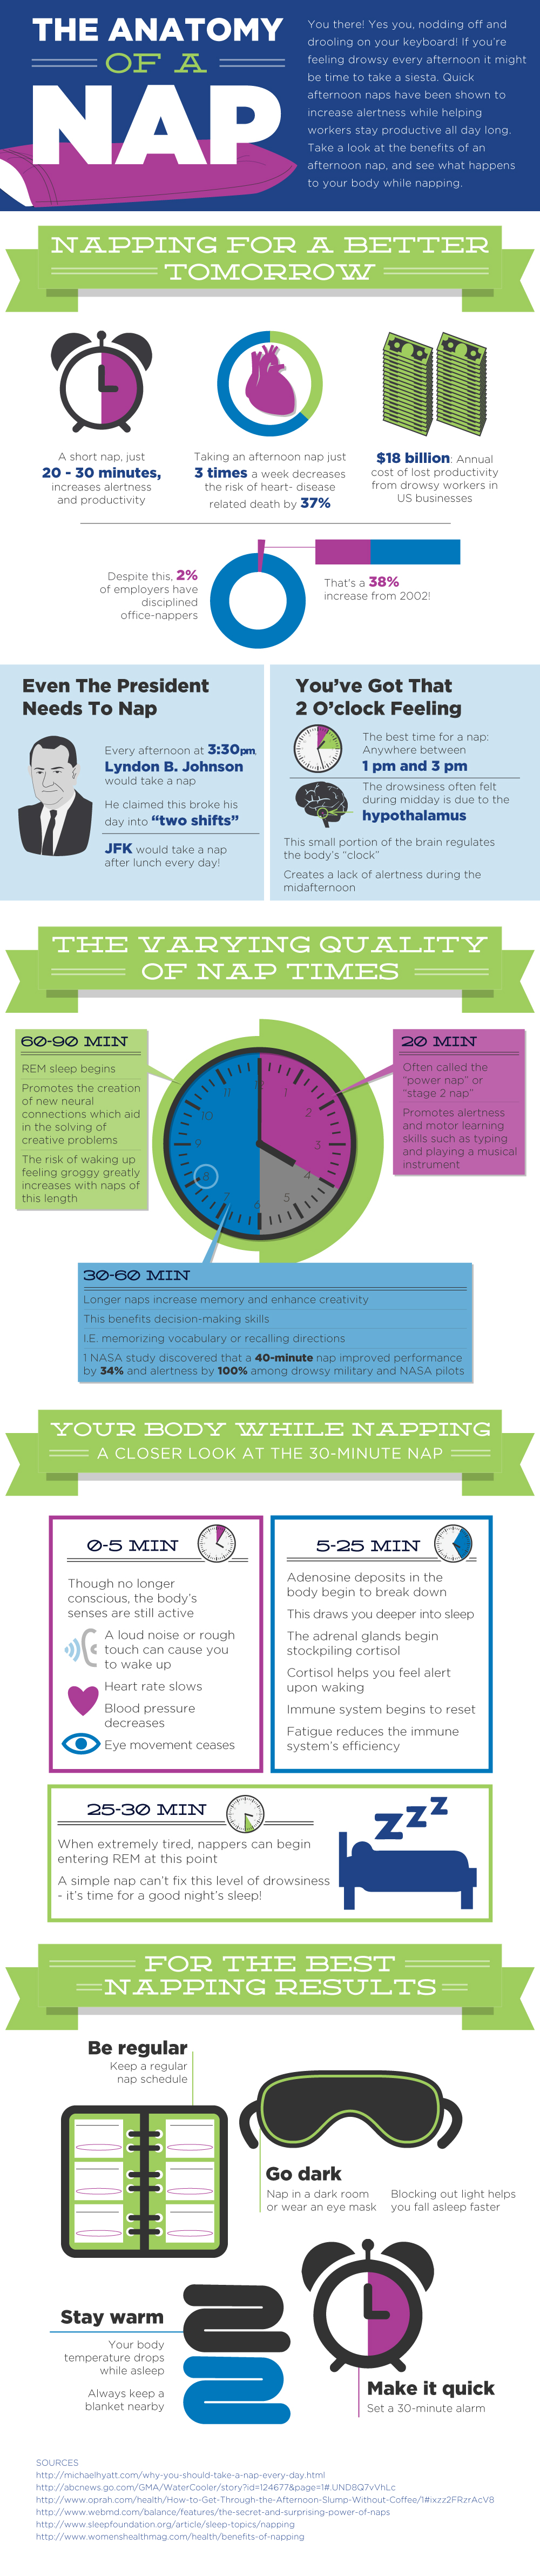 How Napping Impoves Your Health